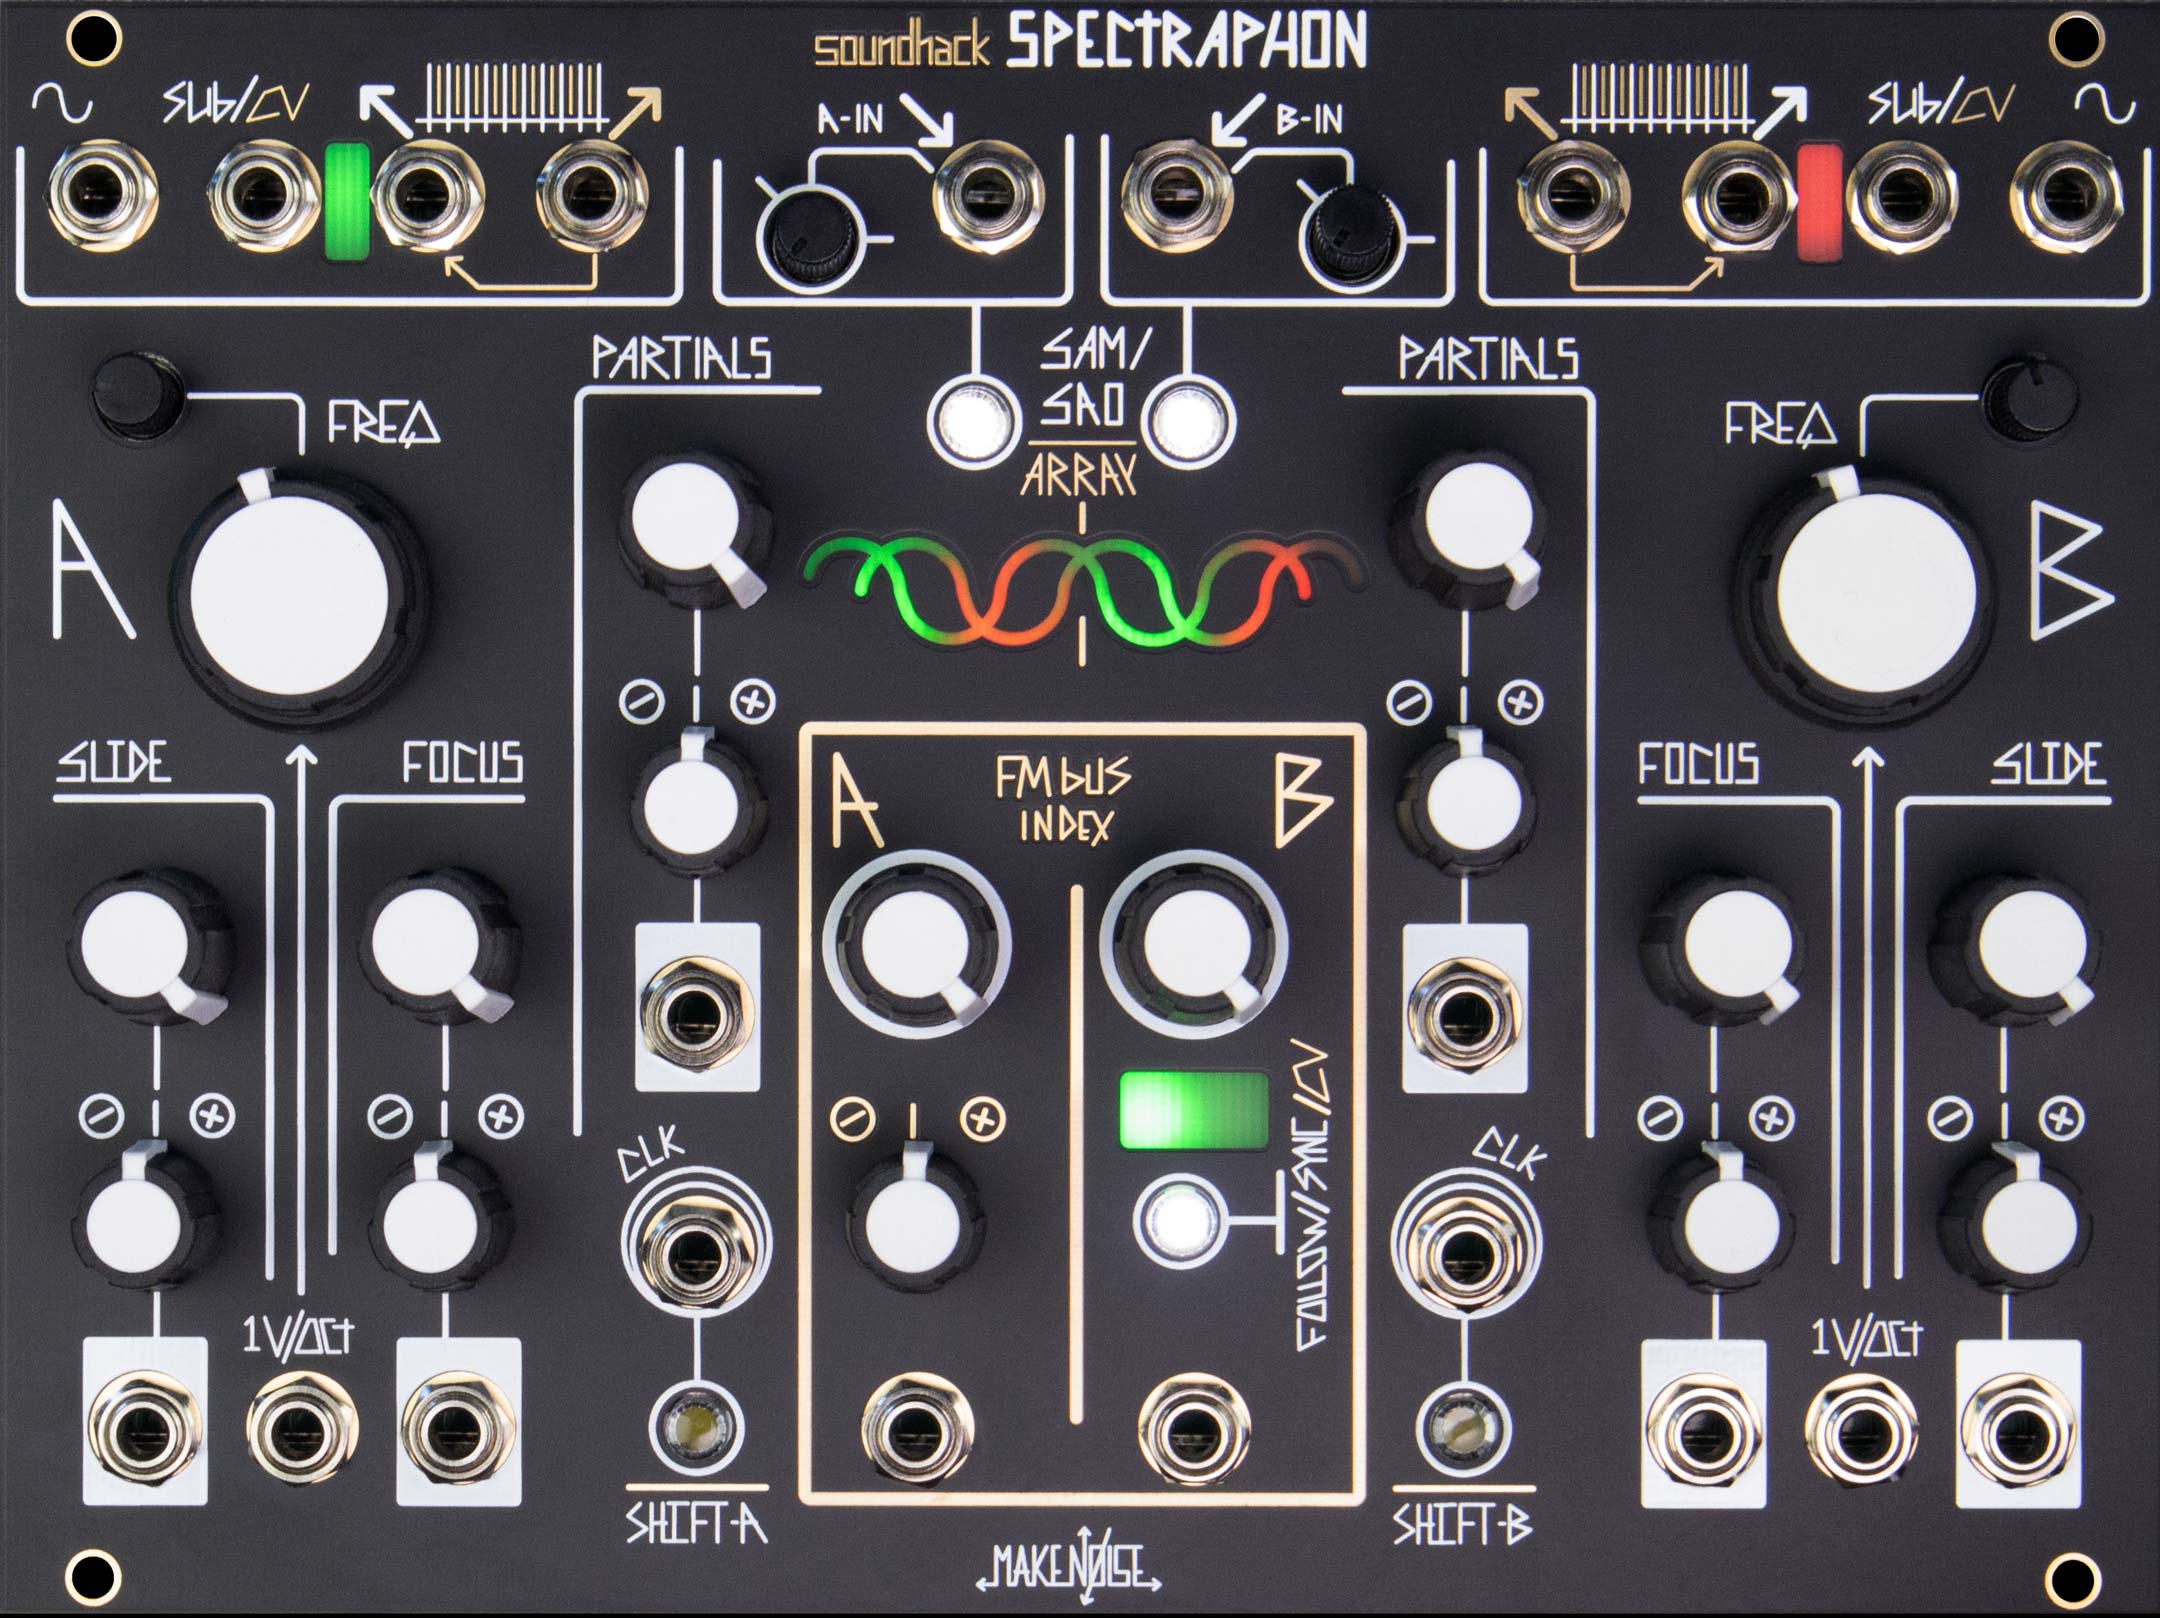 Make Noise Spectraphon -Superbooth 23